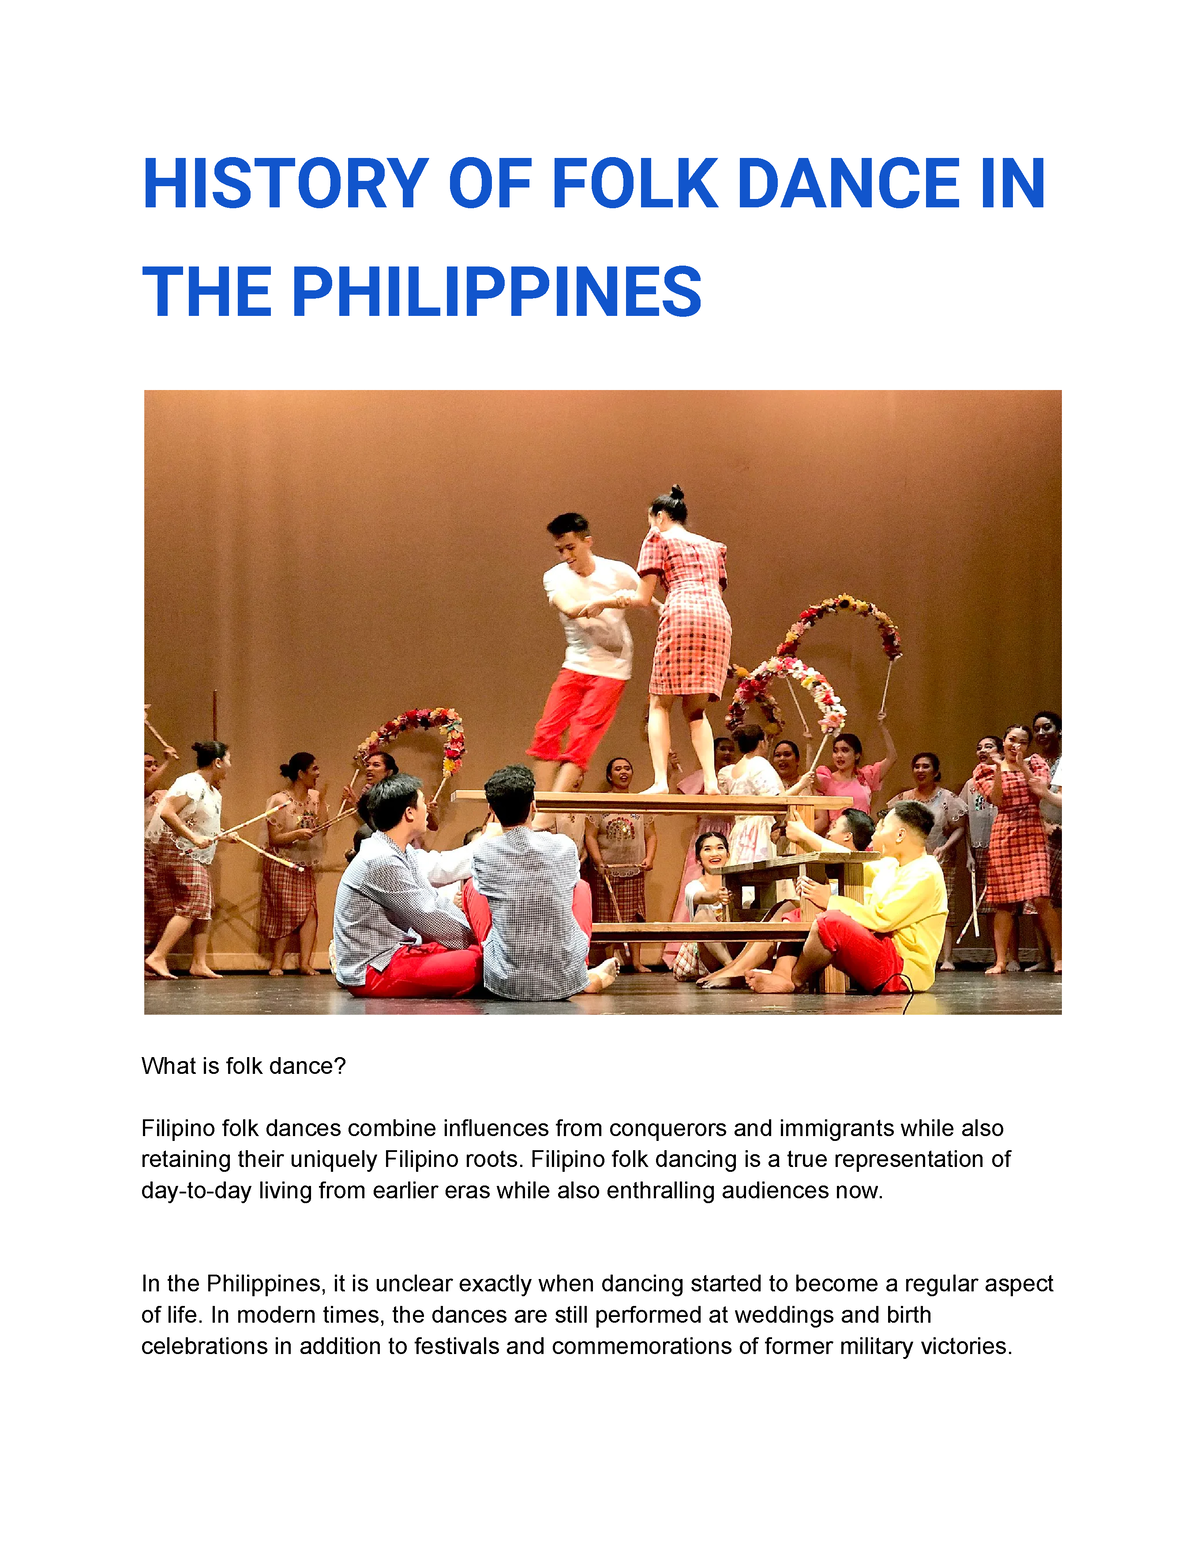 essay about folk dance in the philippines